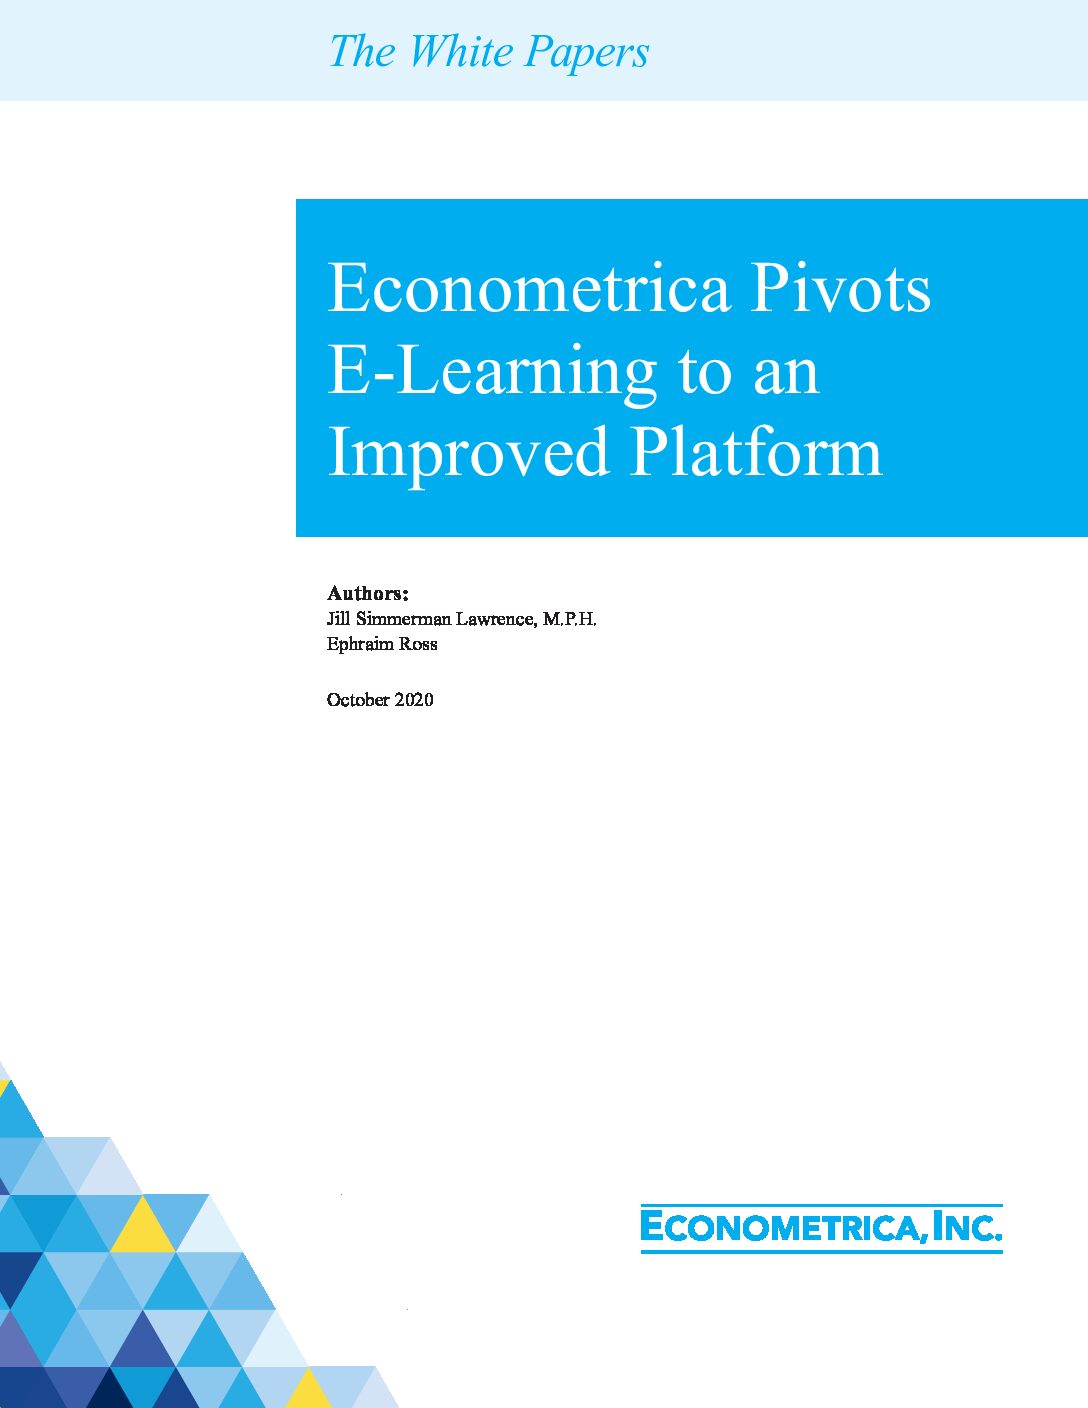 eLearning White Paper Oct2020 1 pdf